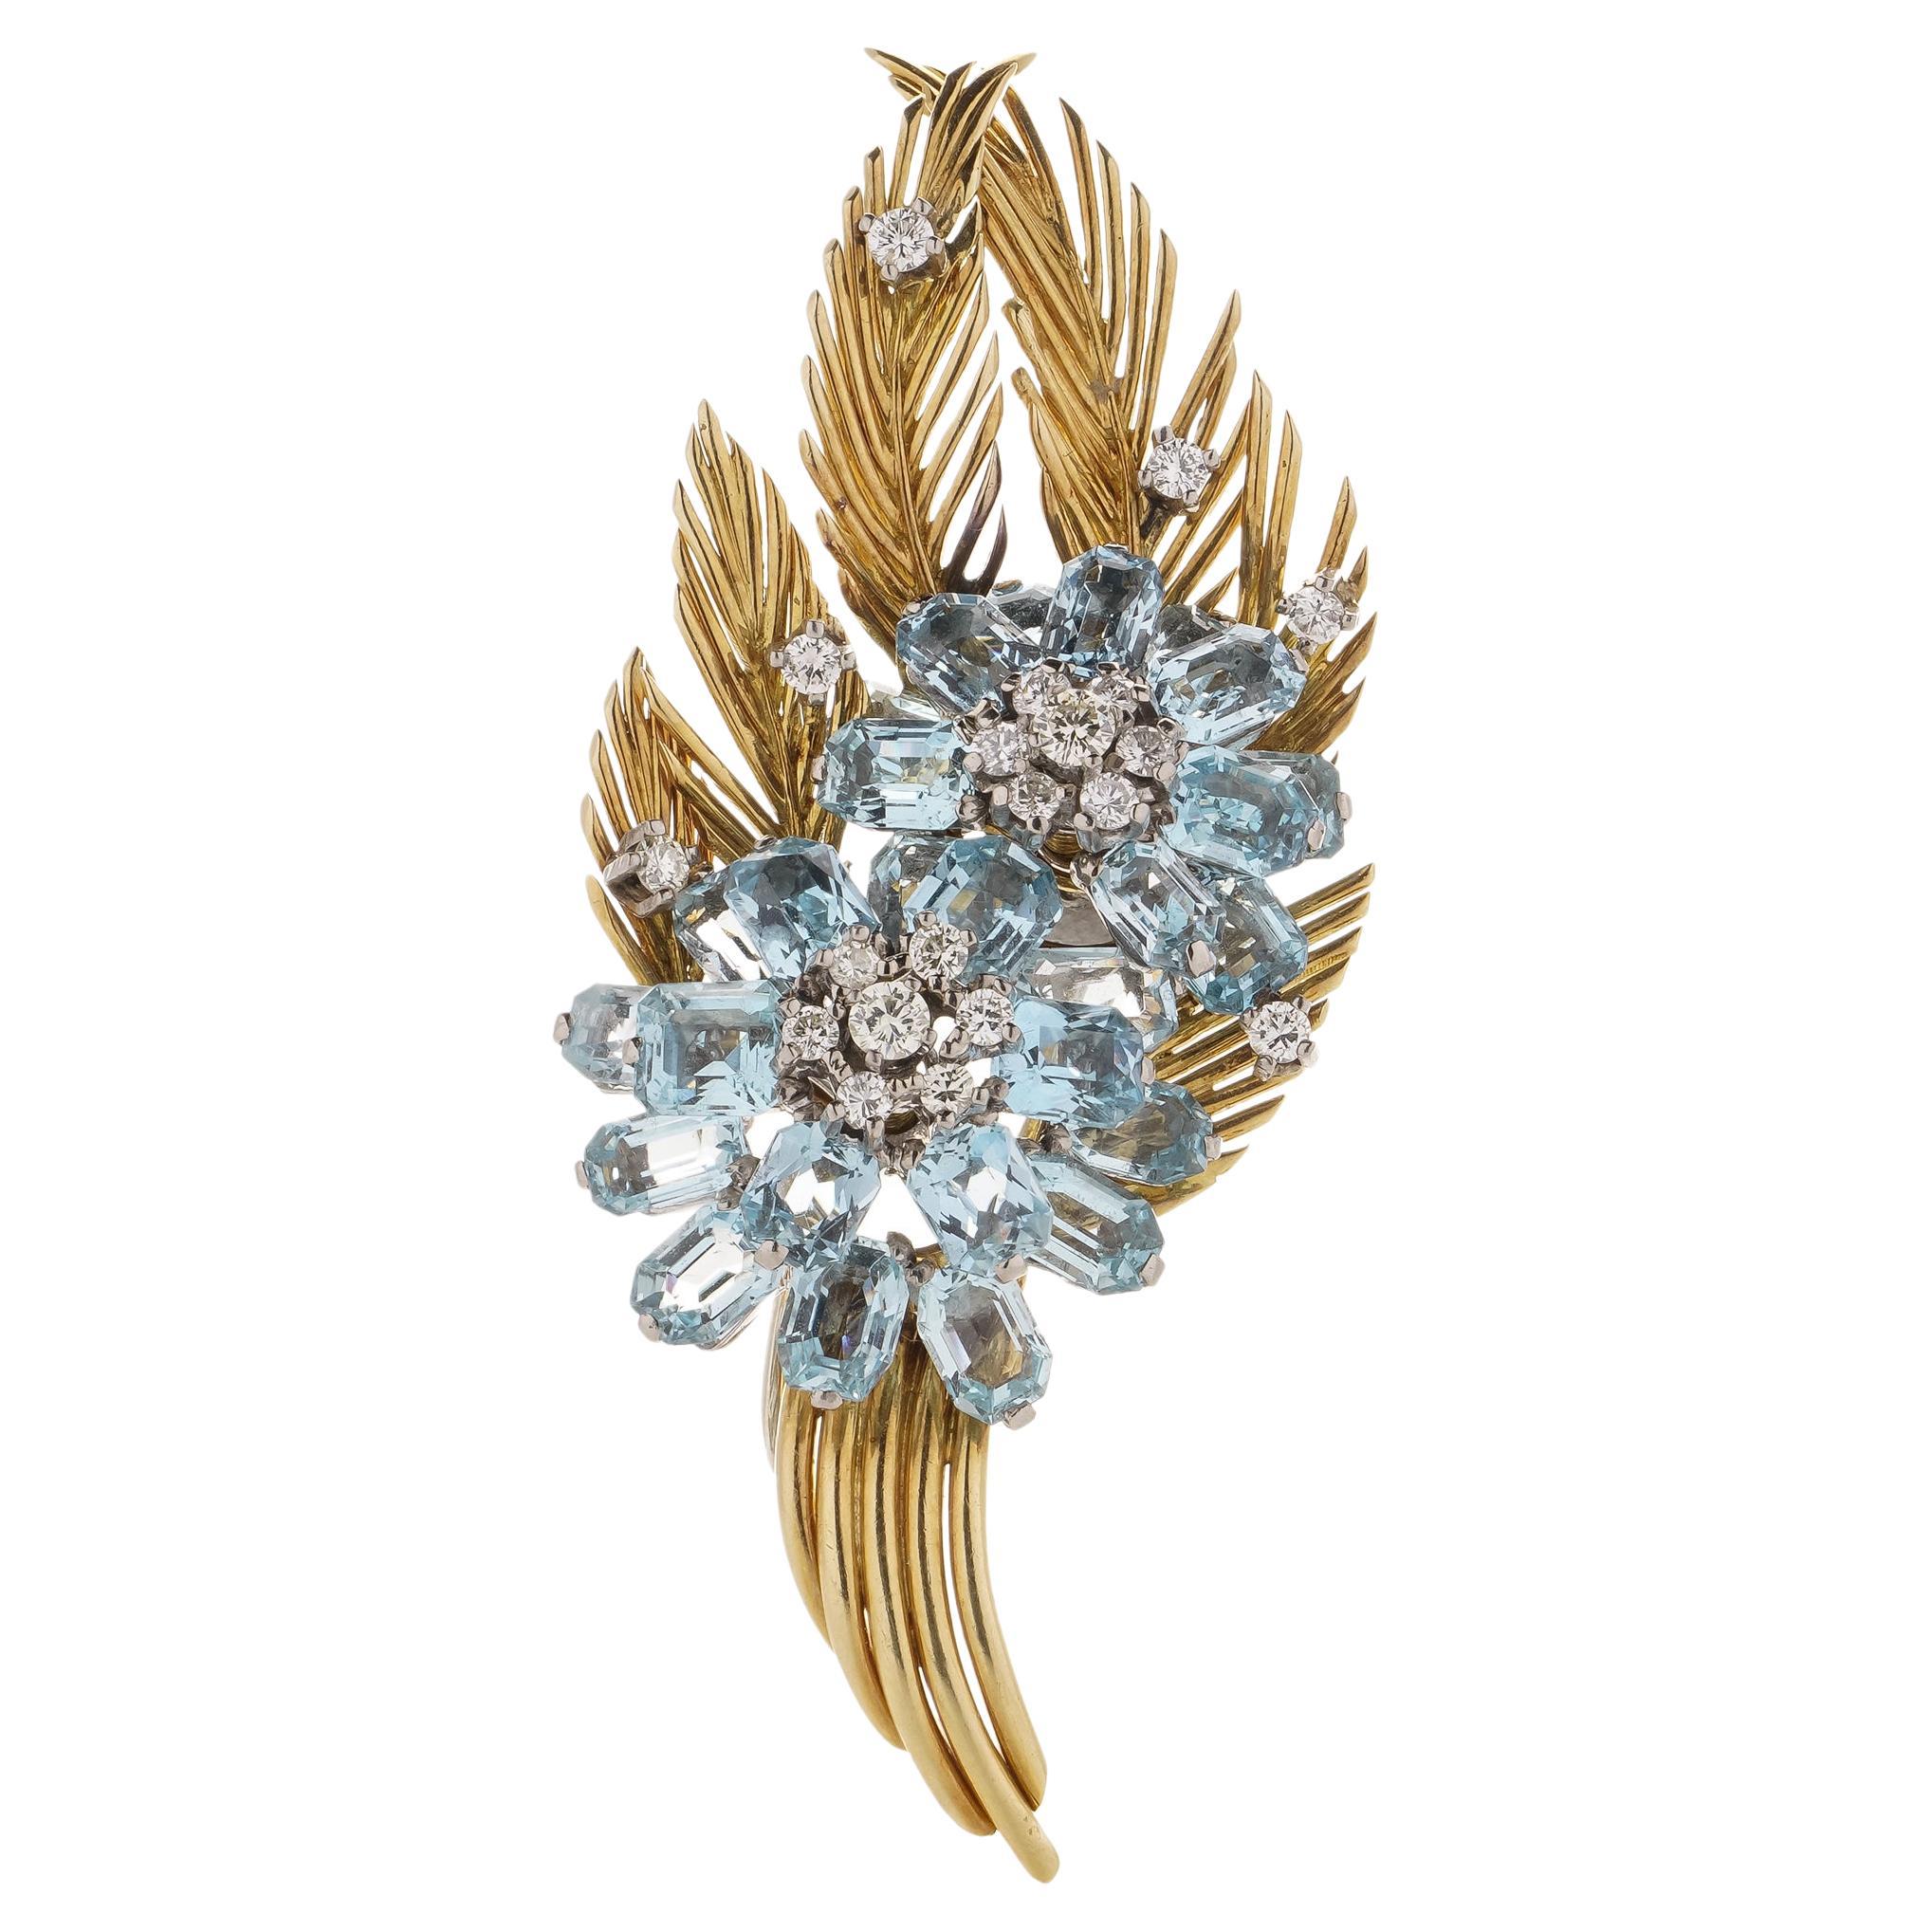 18kt. white and yellow gold flower spray brooch with 10.00 carat Aquamarines 